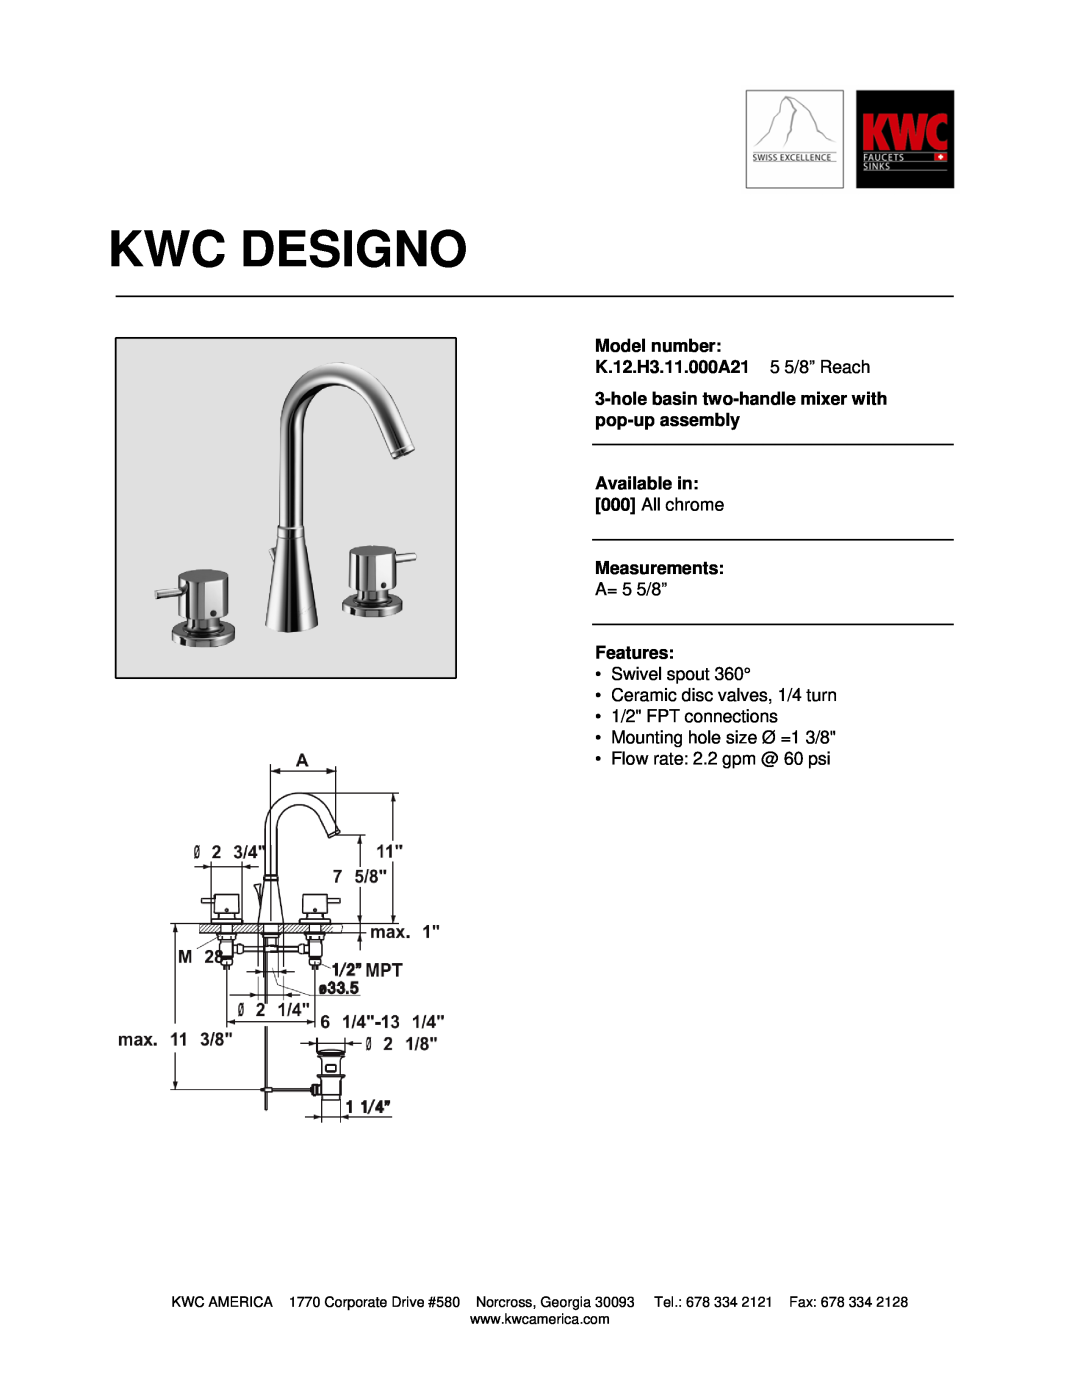 KWC manual Kwc Designo, Model number K.12.H3.11.000A21 5 5/8” Reach, holebasin two-handlemixer with pop-upassembly 